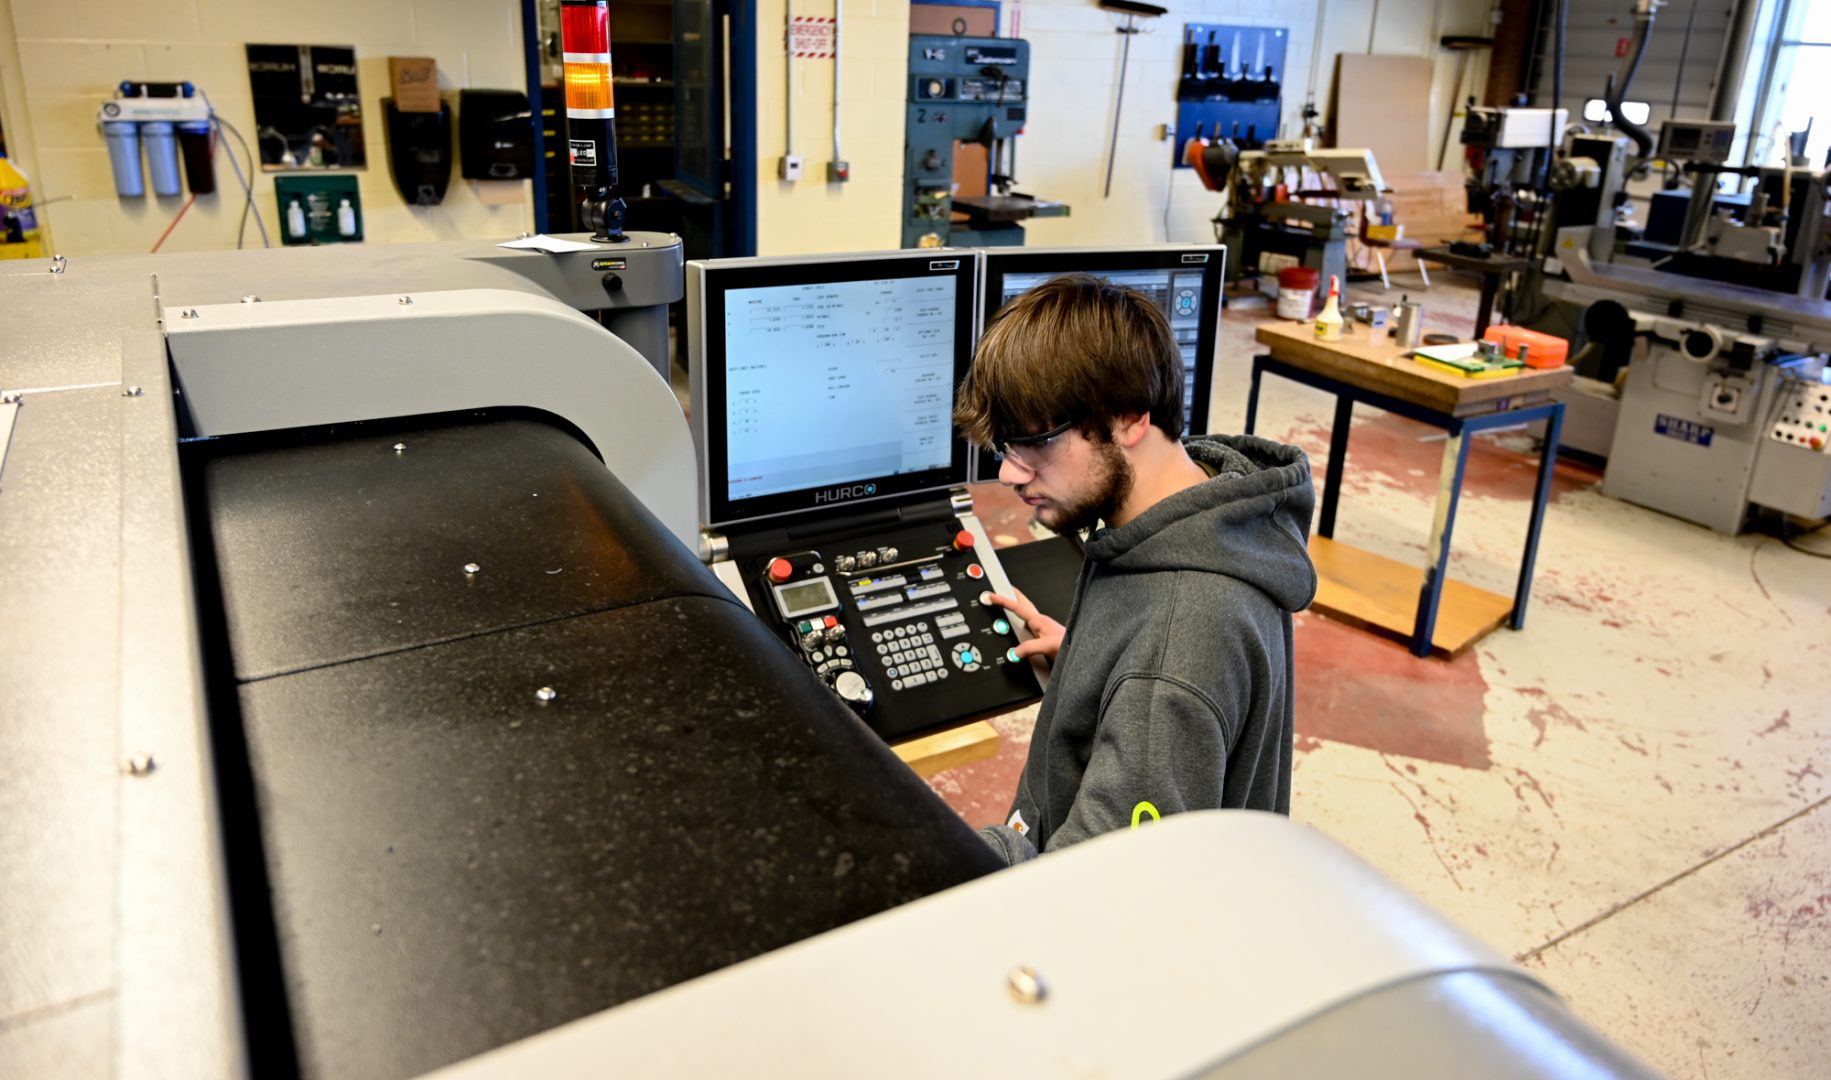 Isaac Graby, 17, sets up a CNC machine to make soft jaws to hold the parts he and his classmates will make for NASA that will be used on the International Space Station at the Lebanon County Career and Technology Center on Feb. 2, 2022